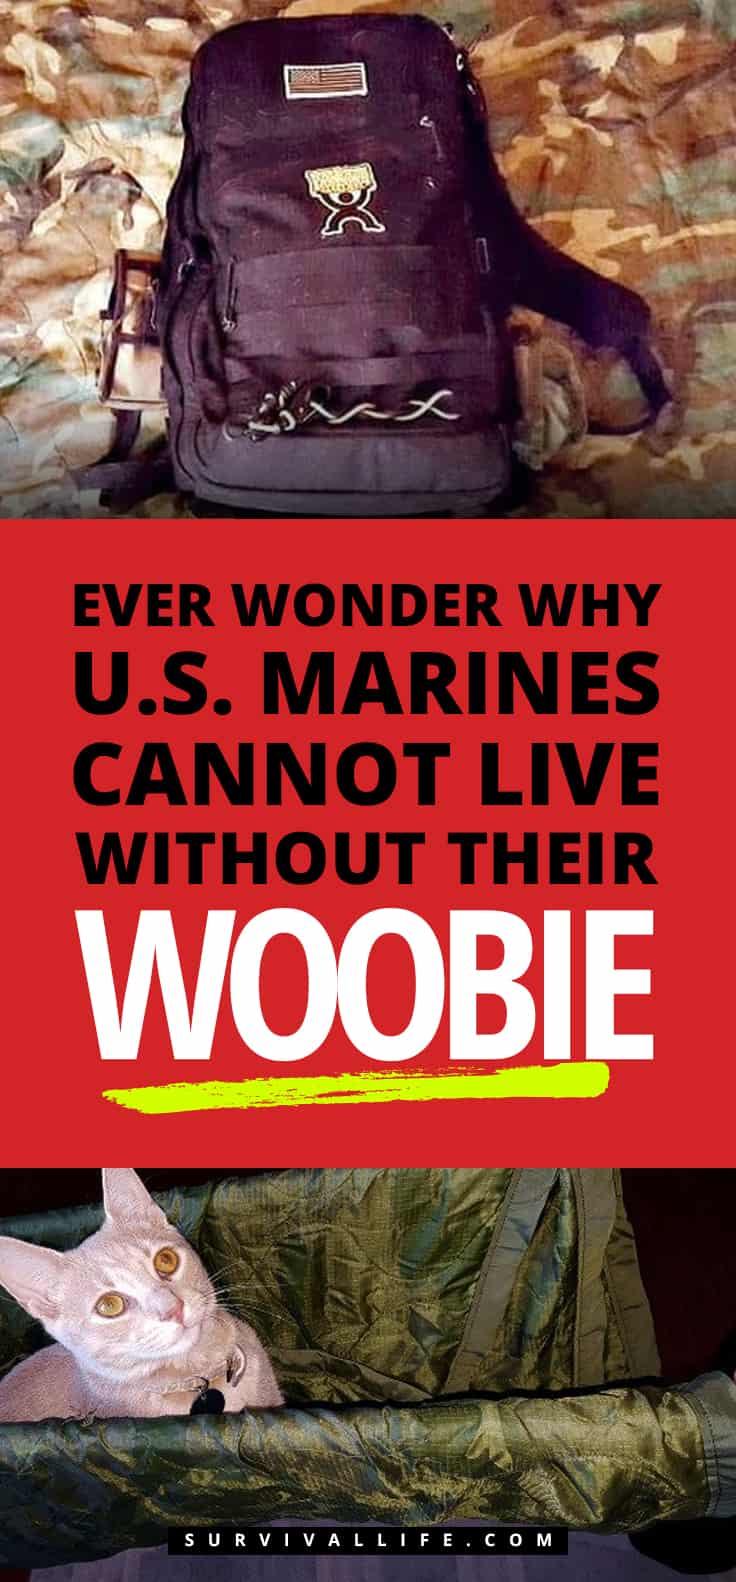 Pinterest Placard | Ever Wonder Why U.S. Marines Cannot Live Without Their "Woobie?" | Micro-Fiber Cloths